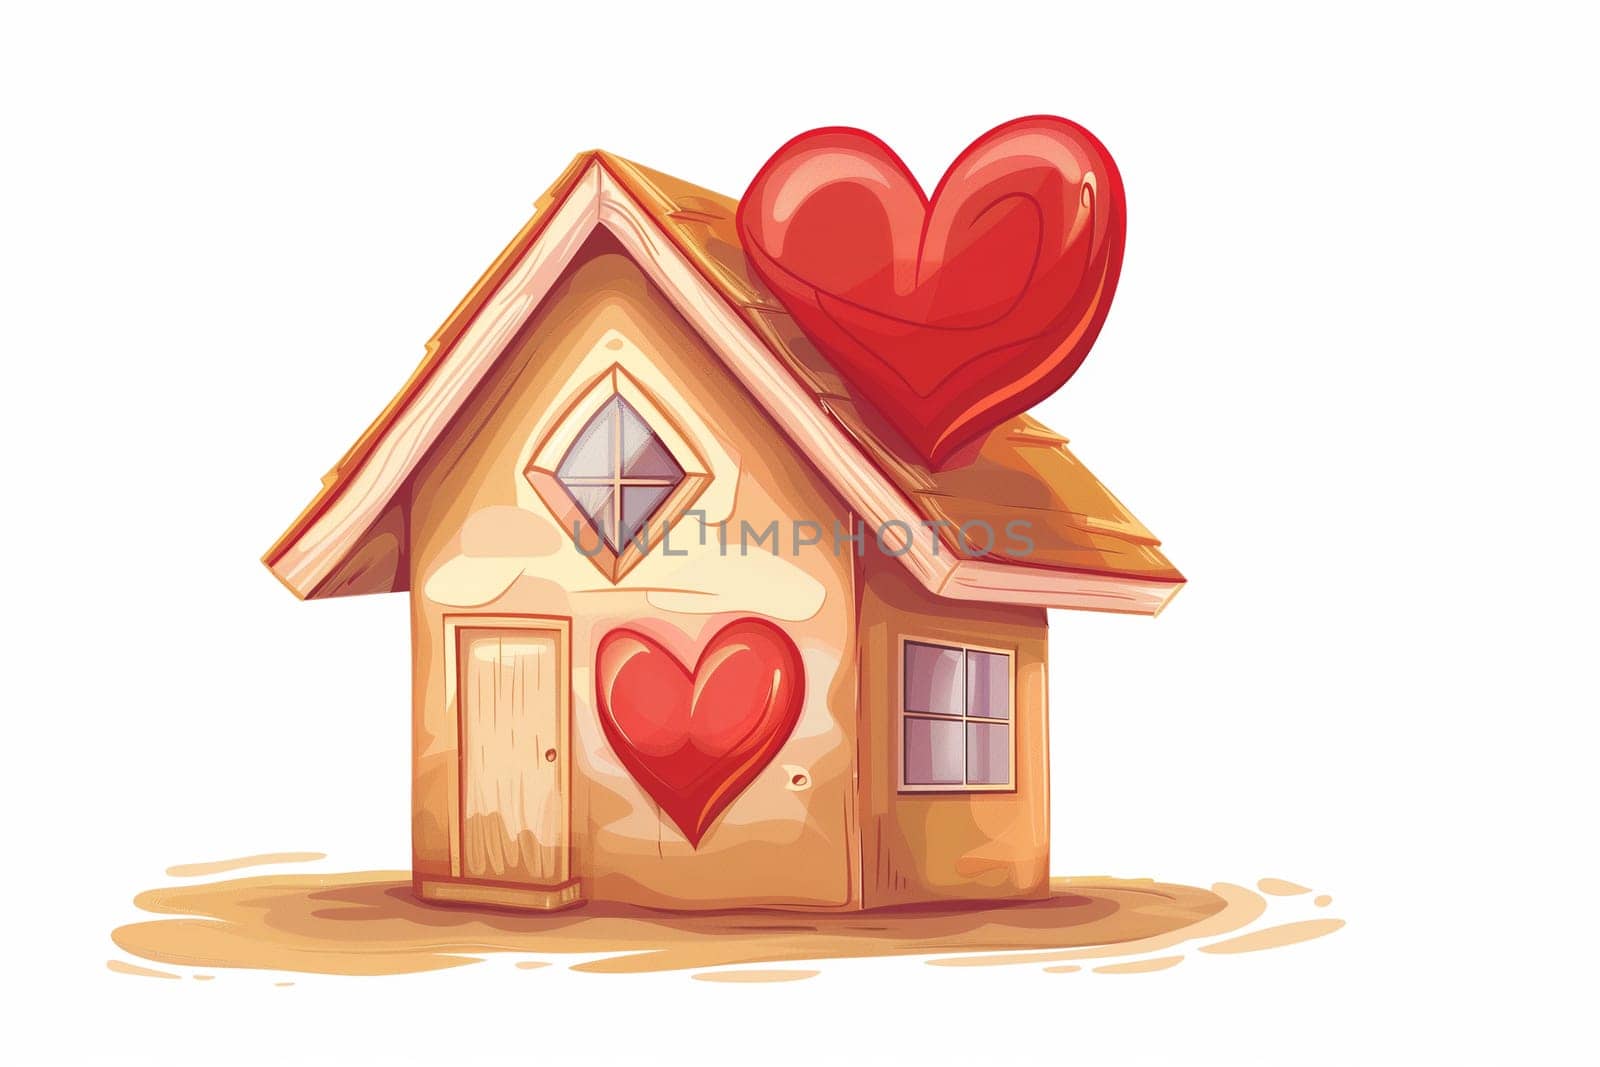 Small House With Heart on Roof by Sd28DimoN_1976